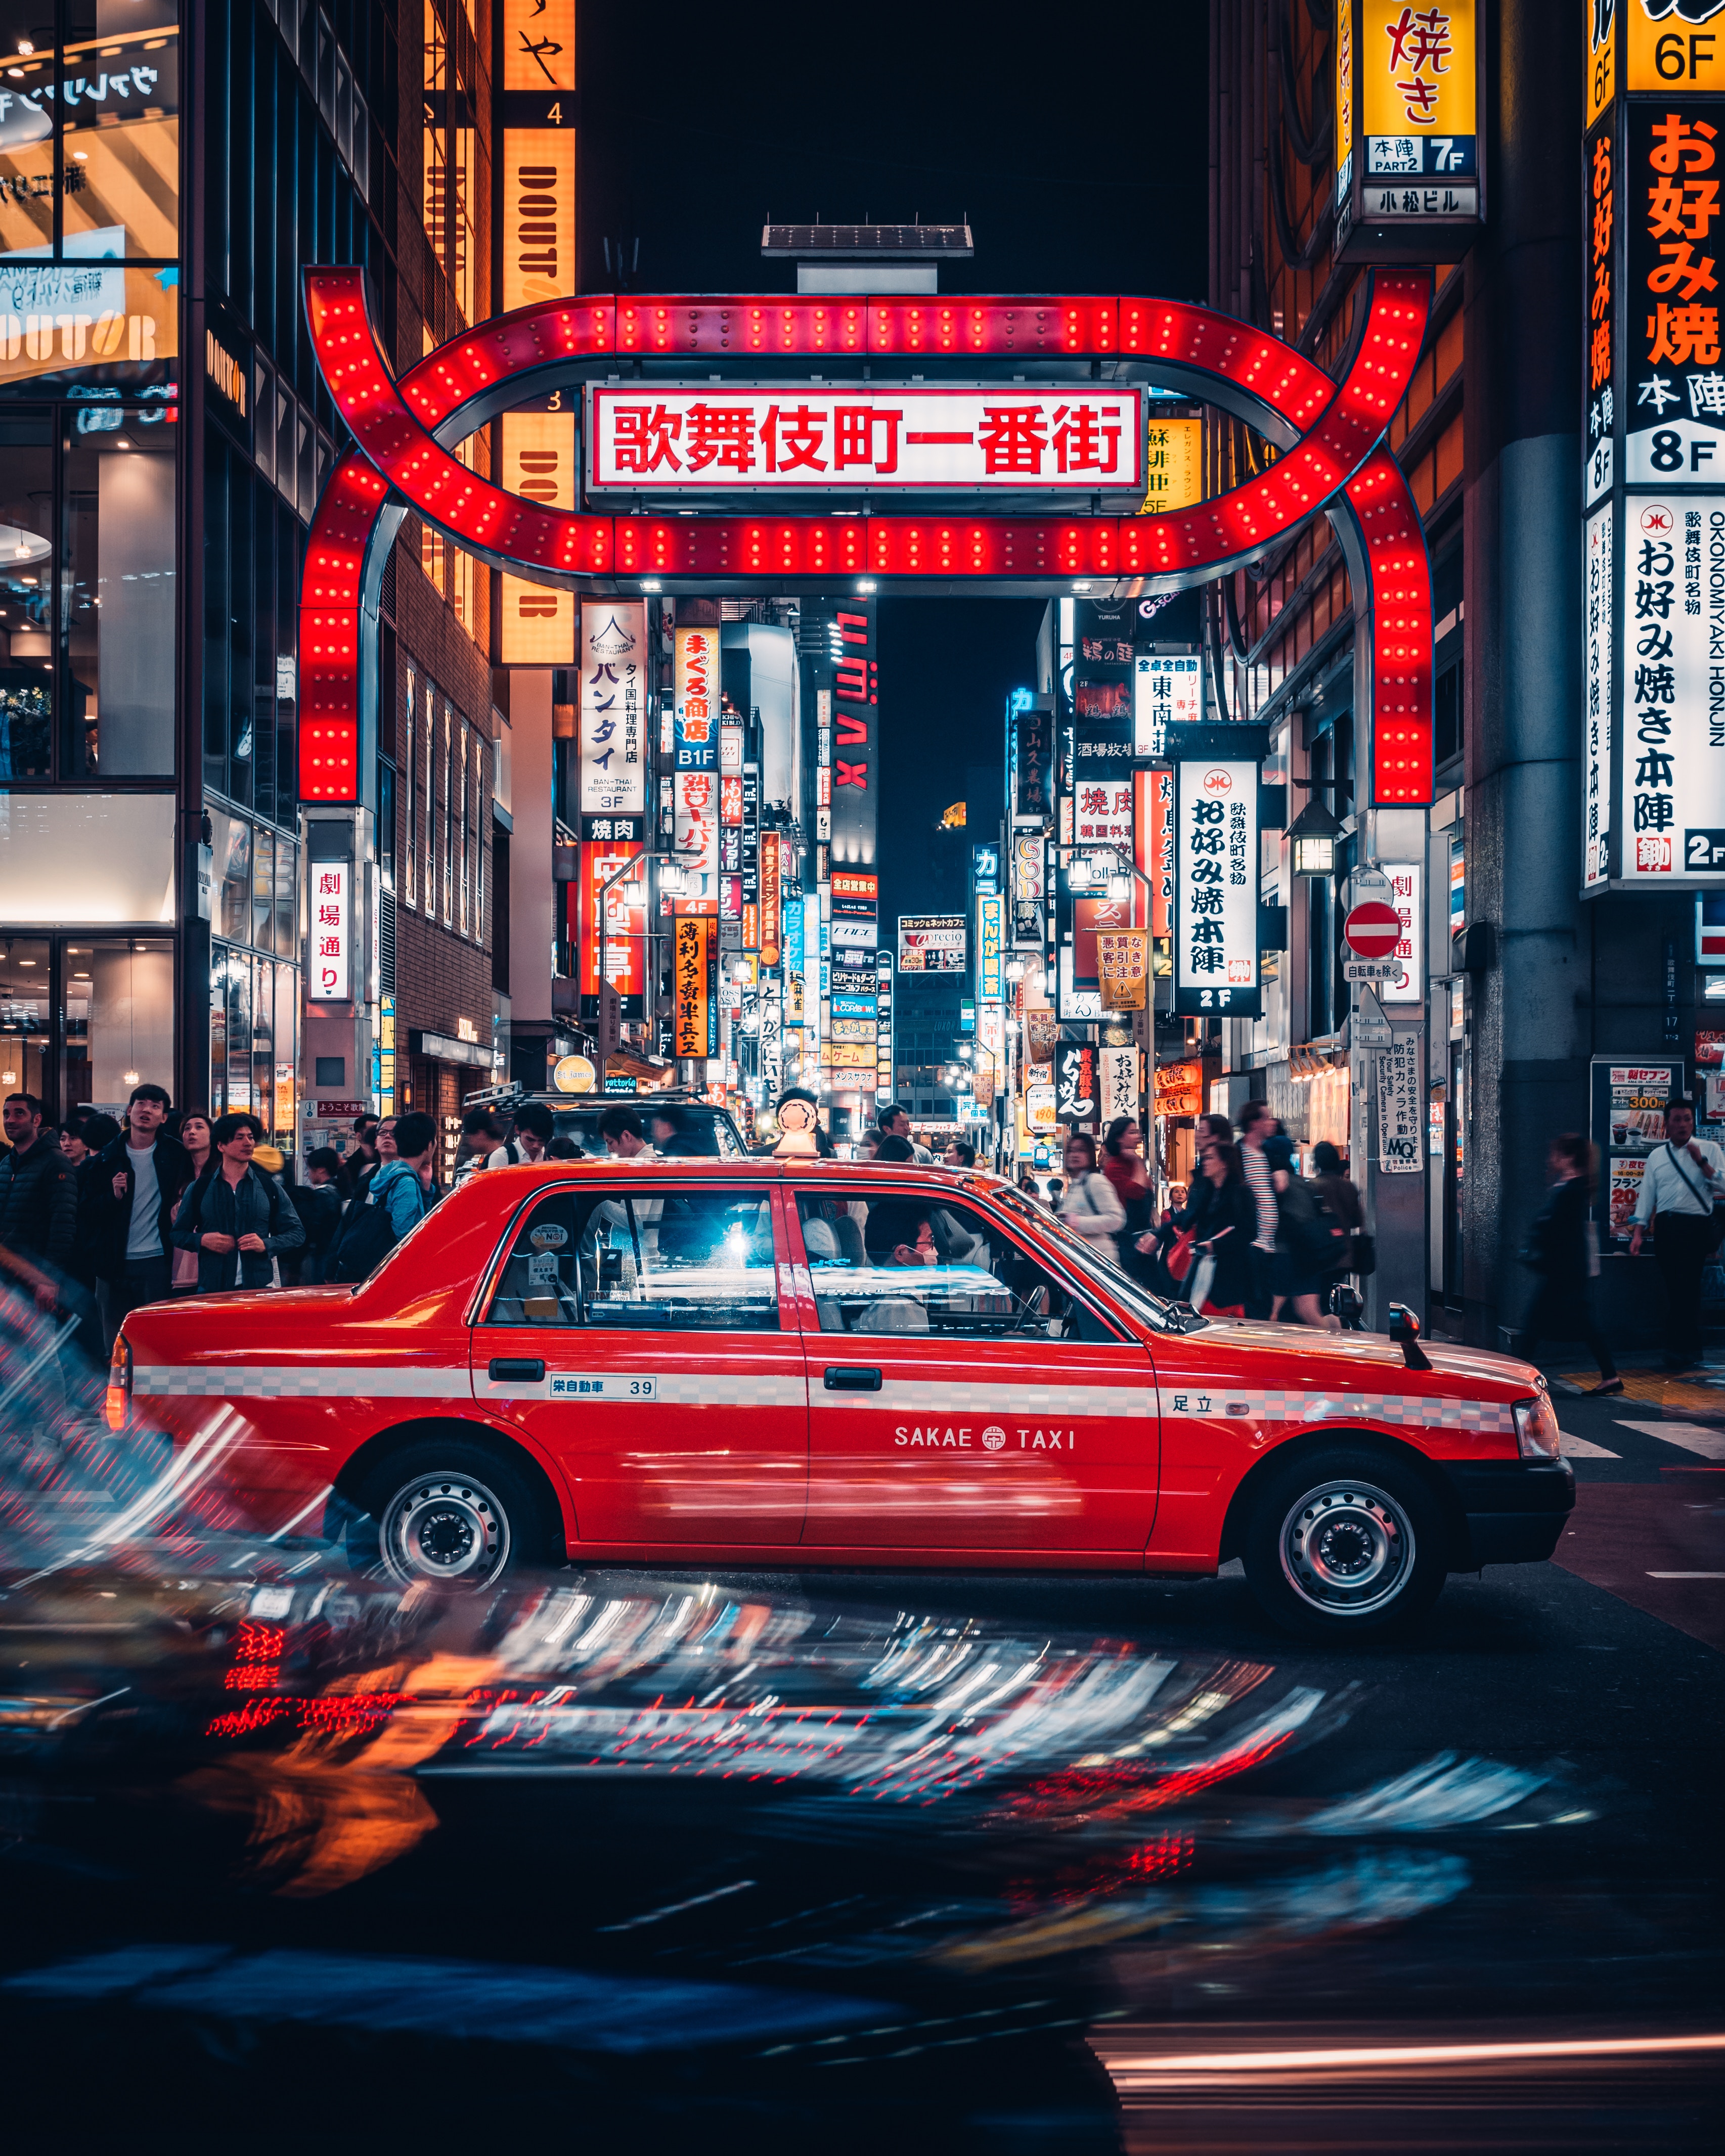 People 3411x4264 Simon Zhu Tokyo urban taxi neon cityscape car vehicle red cars people Asia